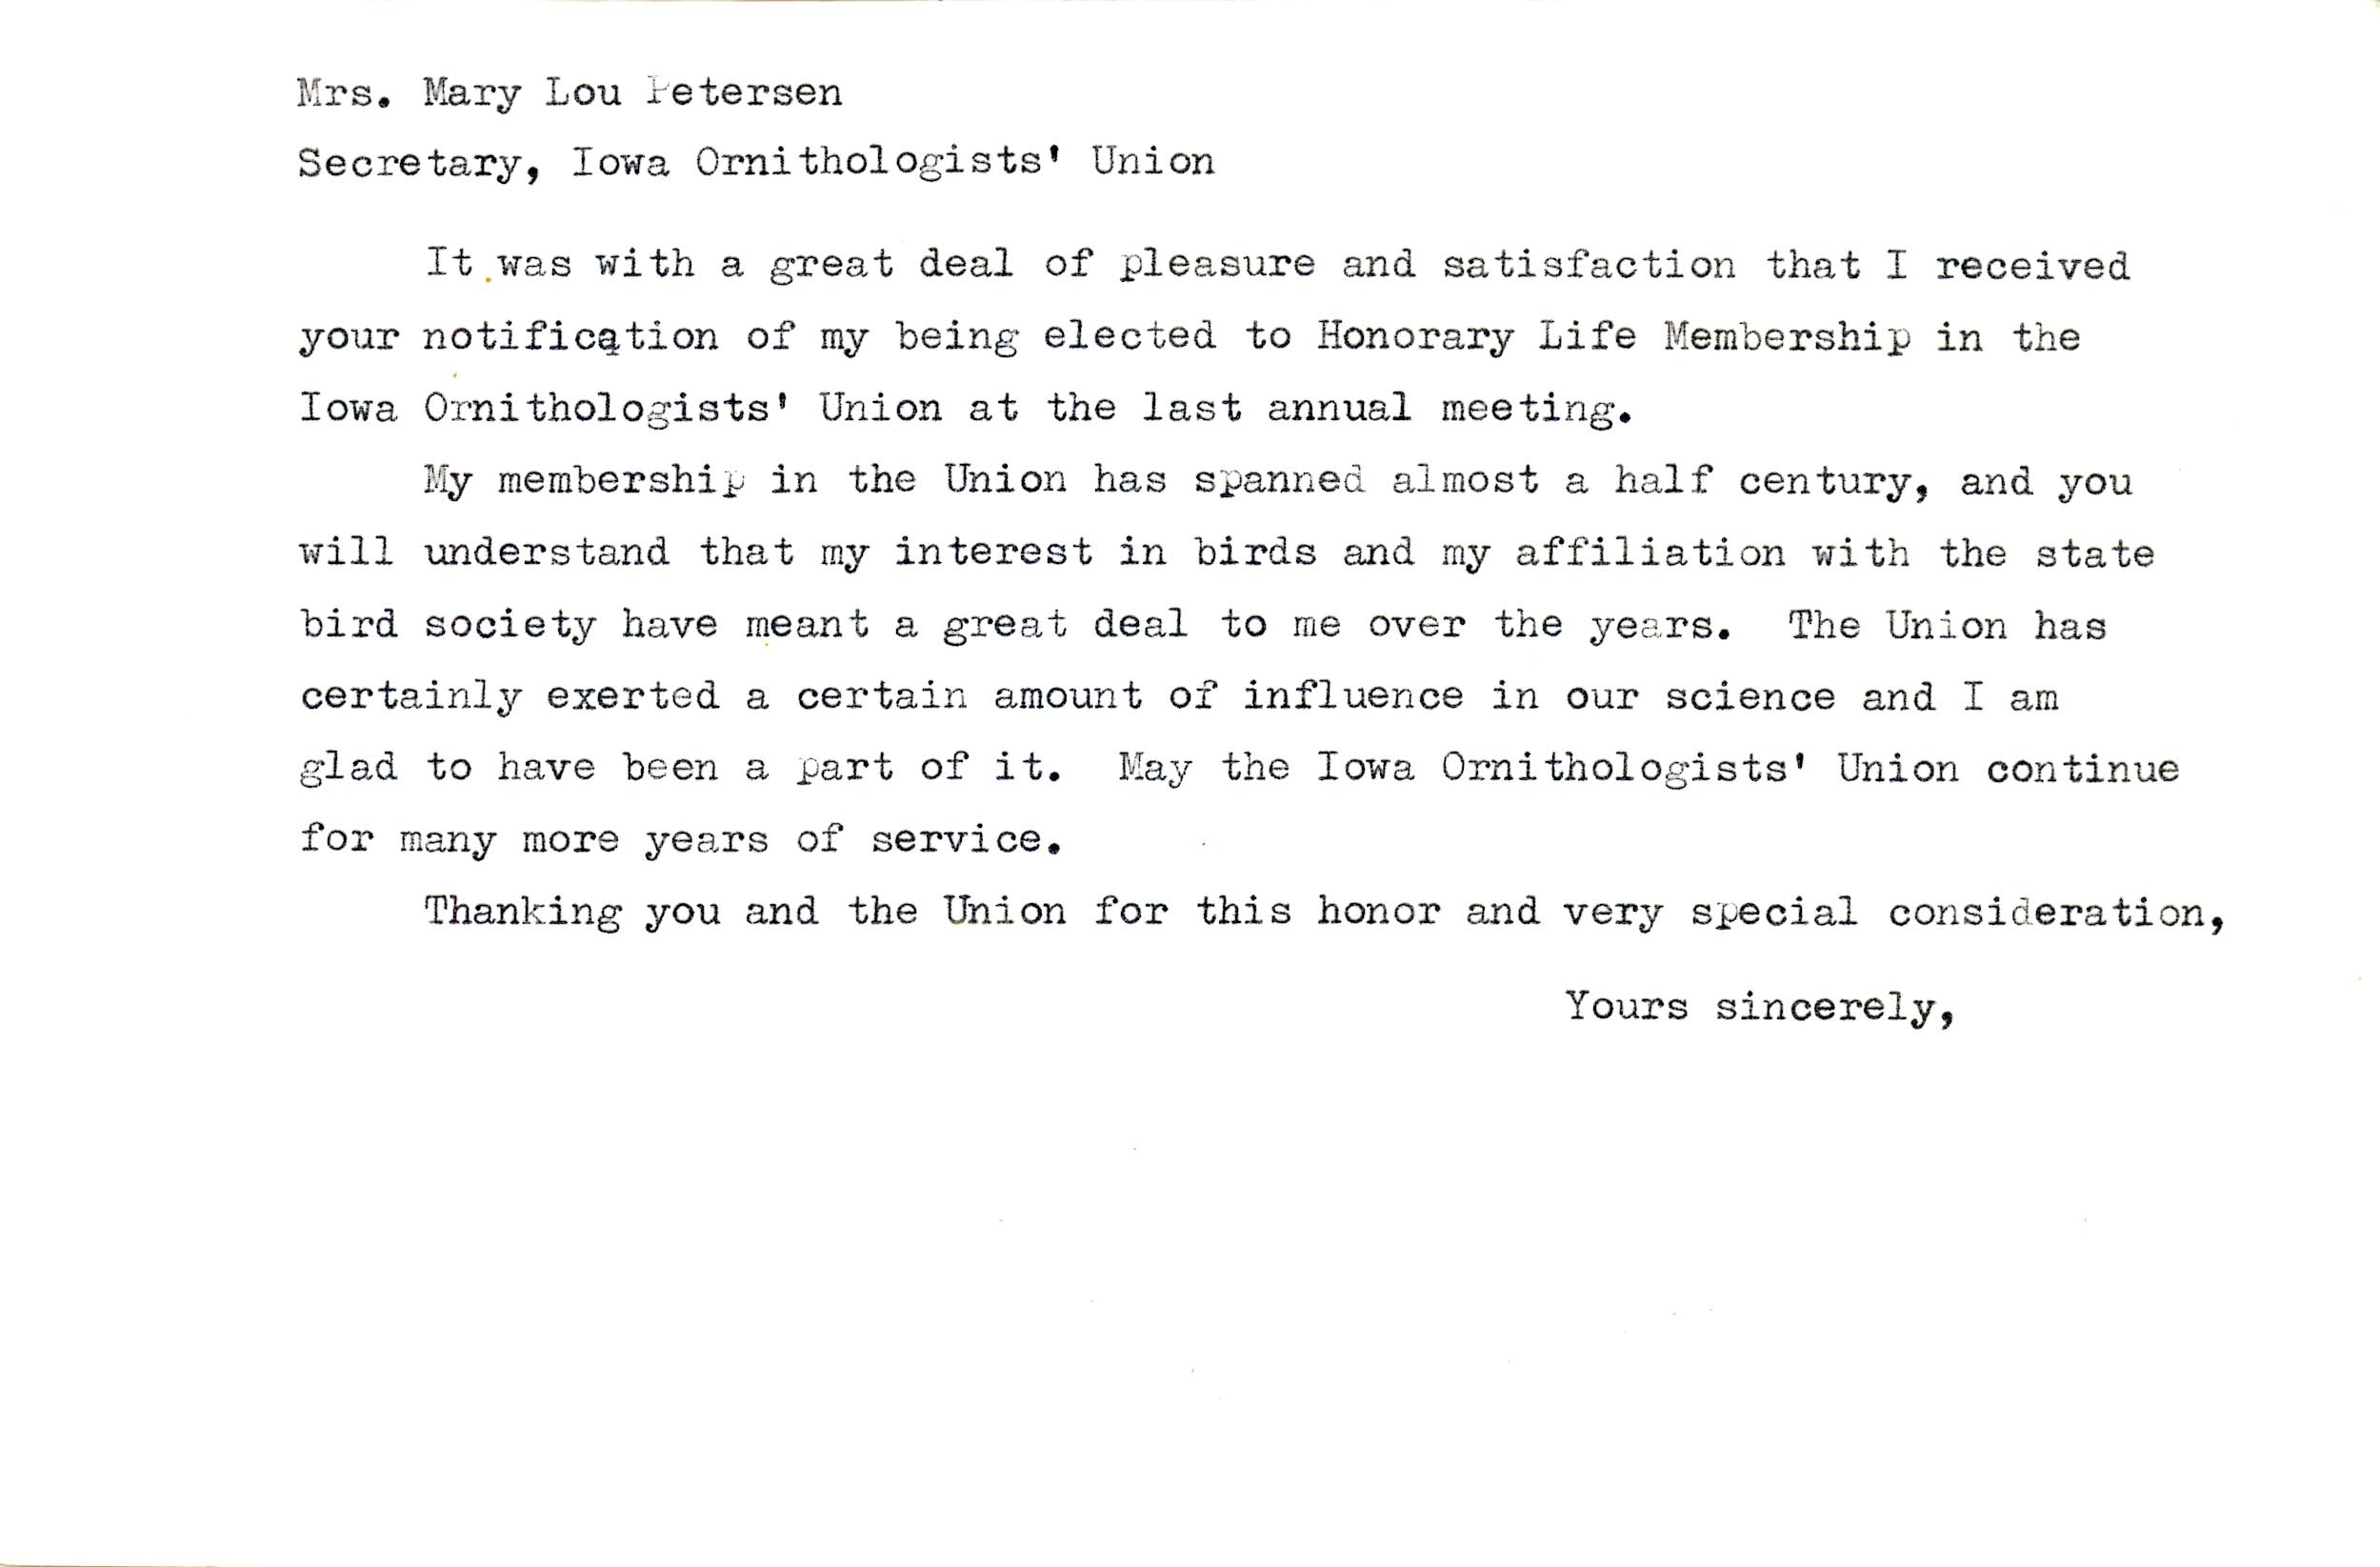 Oscar Allert letter to Mary Lou Petersen regarding honorary membership in the Iowa Ornithologists' Union